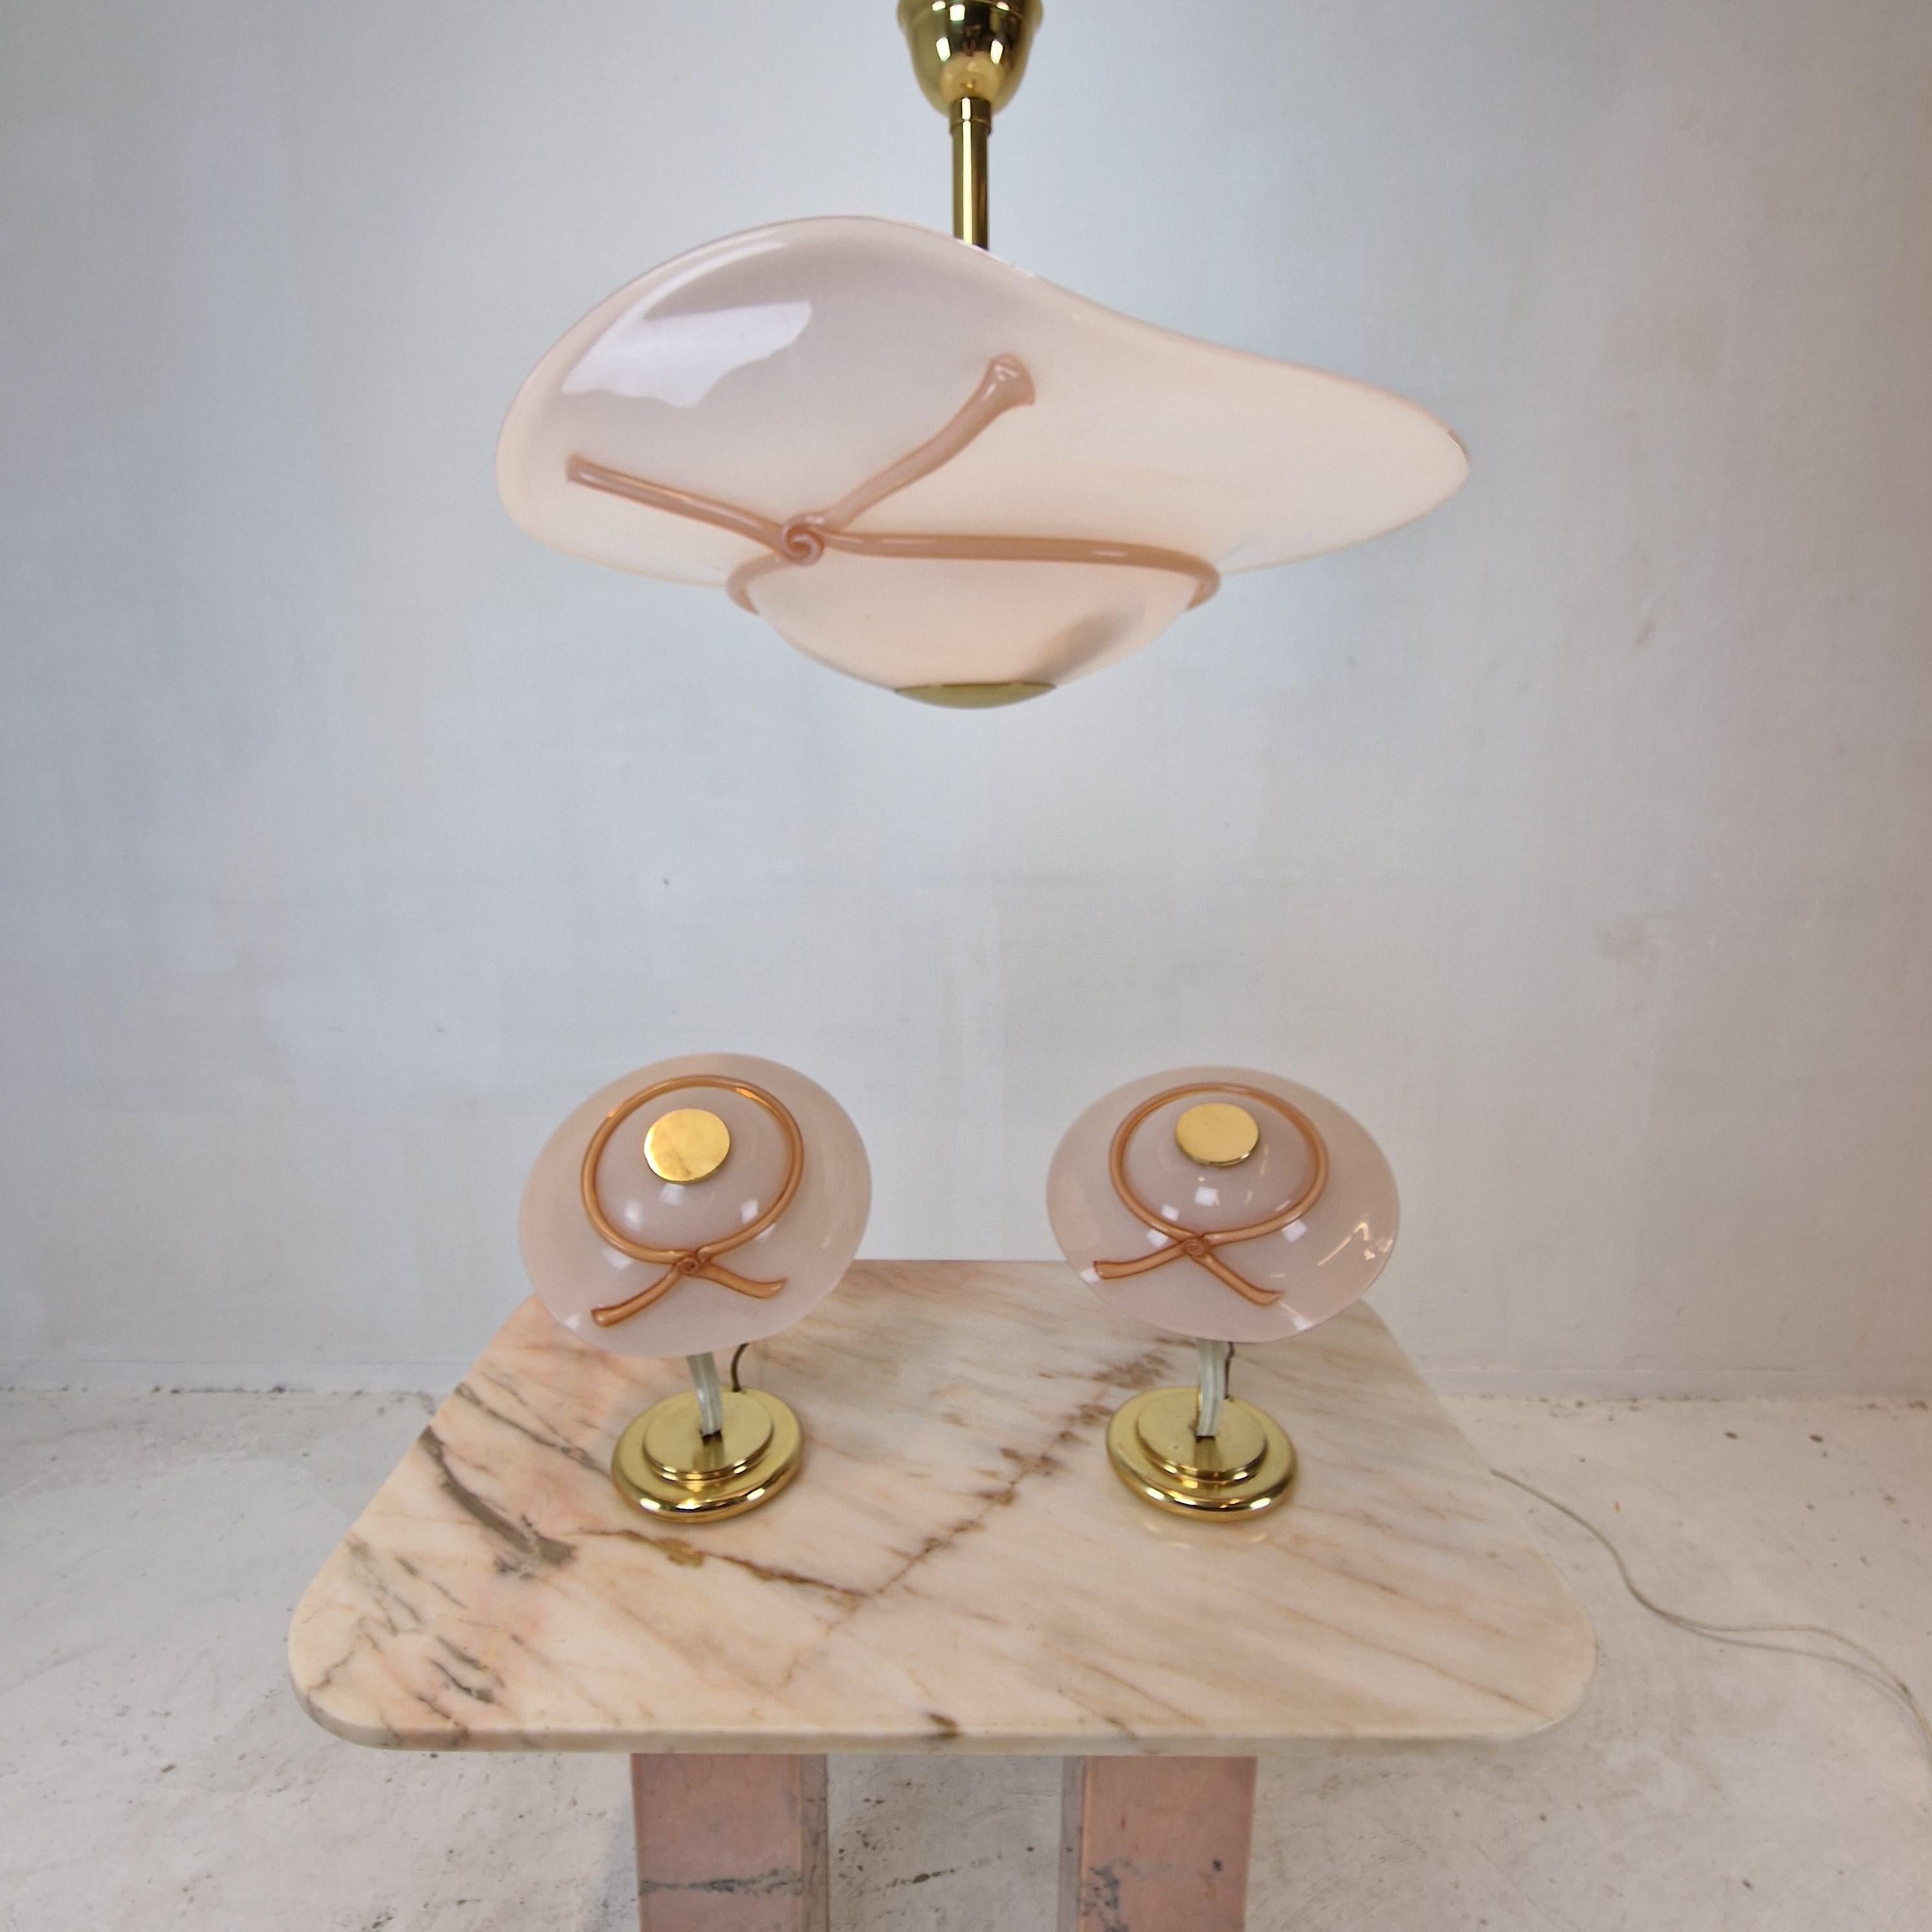 Very beautiful set of two table lamps and one pendant.
This exceptional set is fabricated in the 70's in Italy.

The hand blown glass shades are made in Murano.
All 3 shades have the same shape of a lady's hat.
They are made of very nice pink Murano